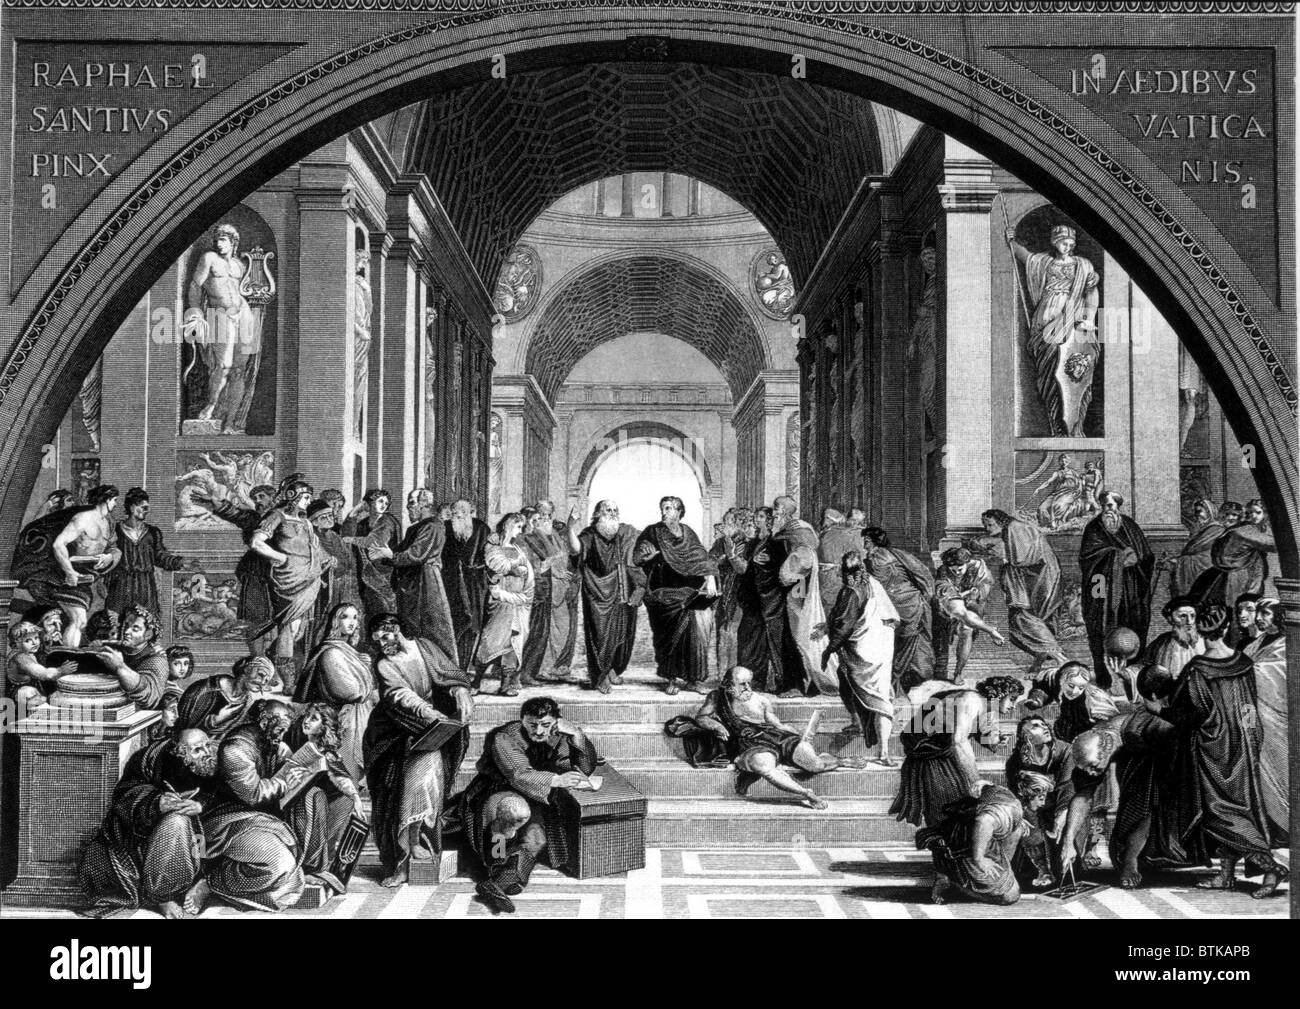 Socrates (center, left), at the school of Athens, 400 BC. Engraving after painting by Raphael. Stock Photo